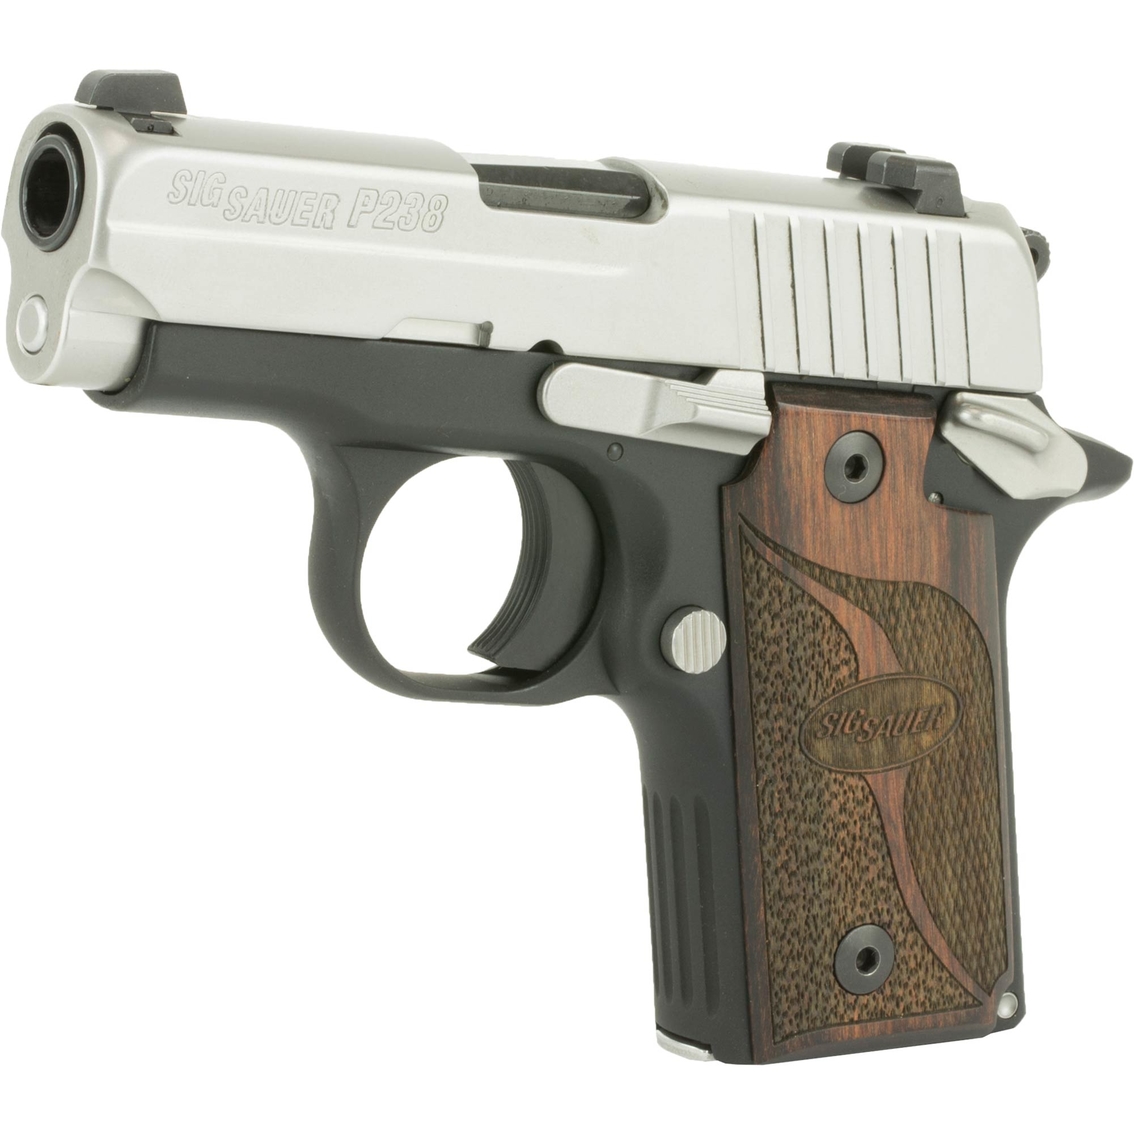 Sig Sauer P238 380 ACP 2.7 in. Barrel 6 Rnd Pistol Two Tone - Image 3 of 3